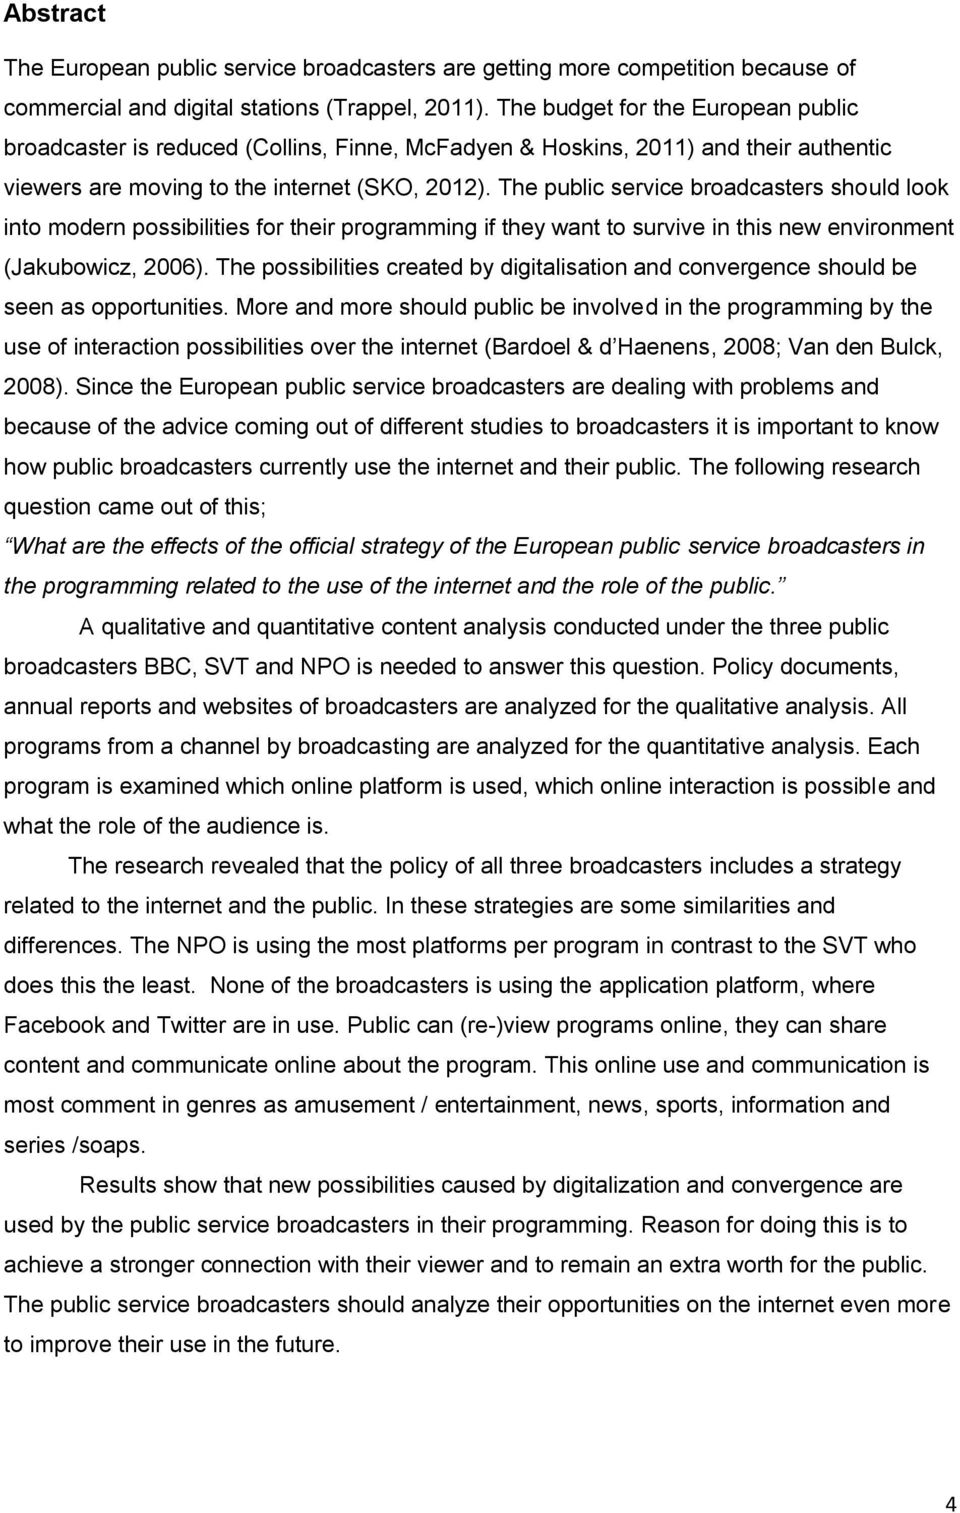 The public service broadcasters should look into modern possibilities for their programming if they want to survive in this new environment (Jakubowicz, 2006).